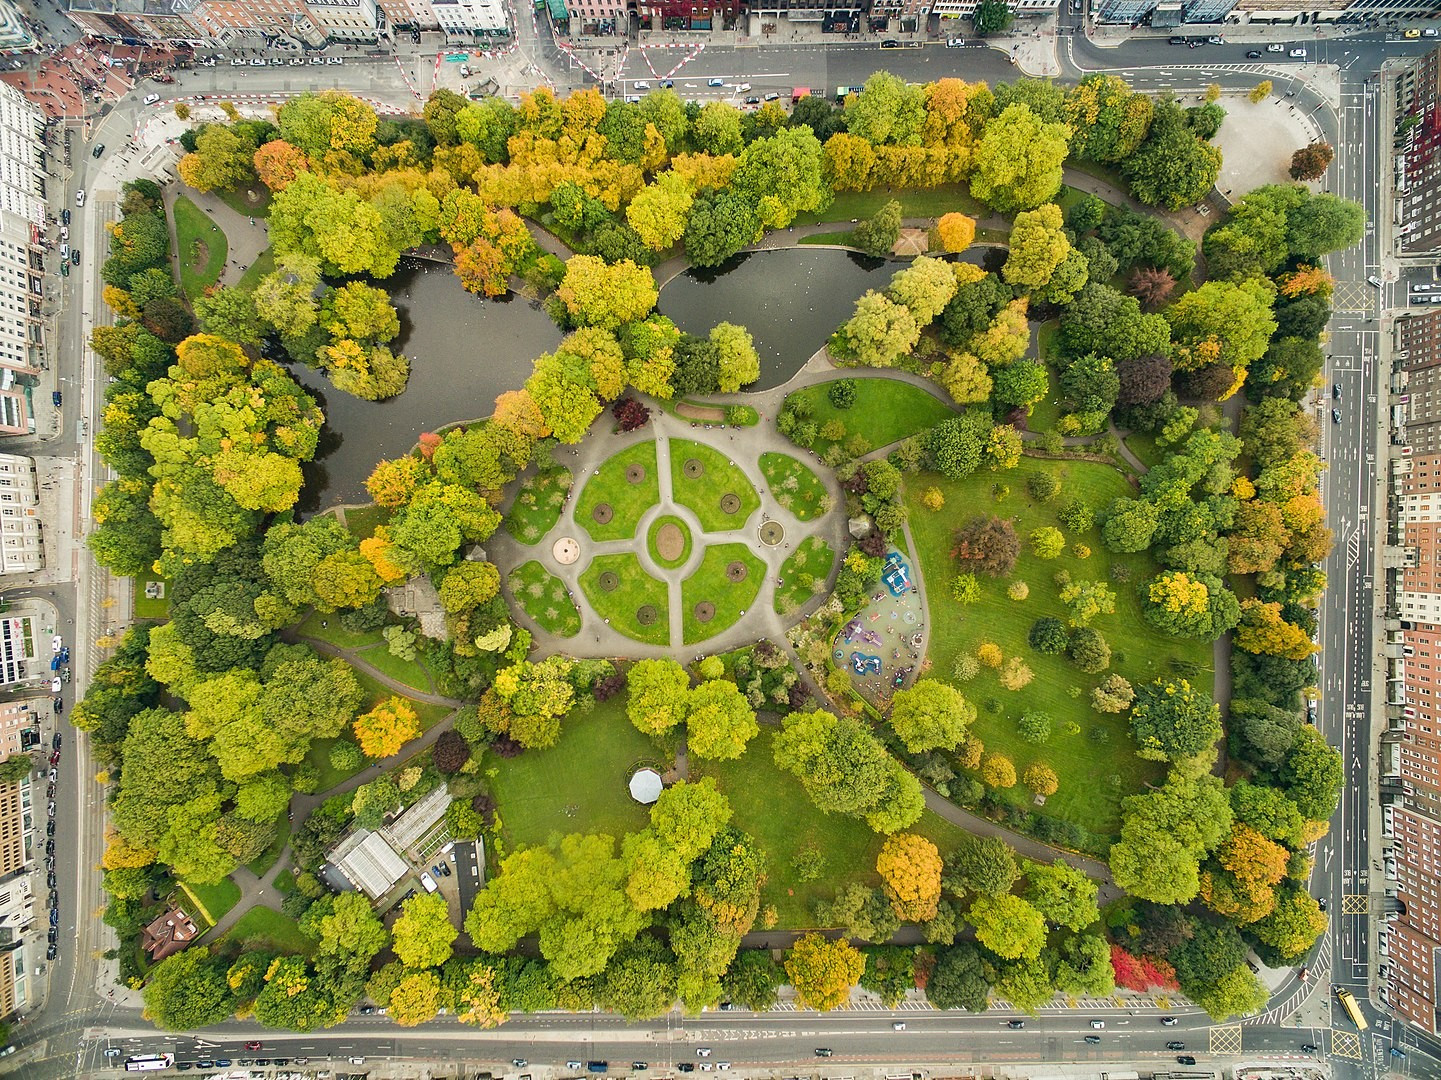 By Dronepicr (edited by King of Hearts)Edit corrects CA and sharpens image - File:Dublin Stephen's Green-44.jpg, CC BY 3.0, https://commons.wikimedia.org/w/index.php?curid=52447595